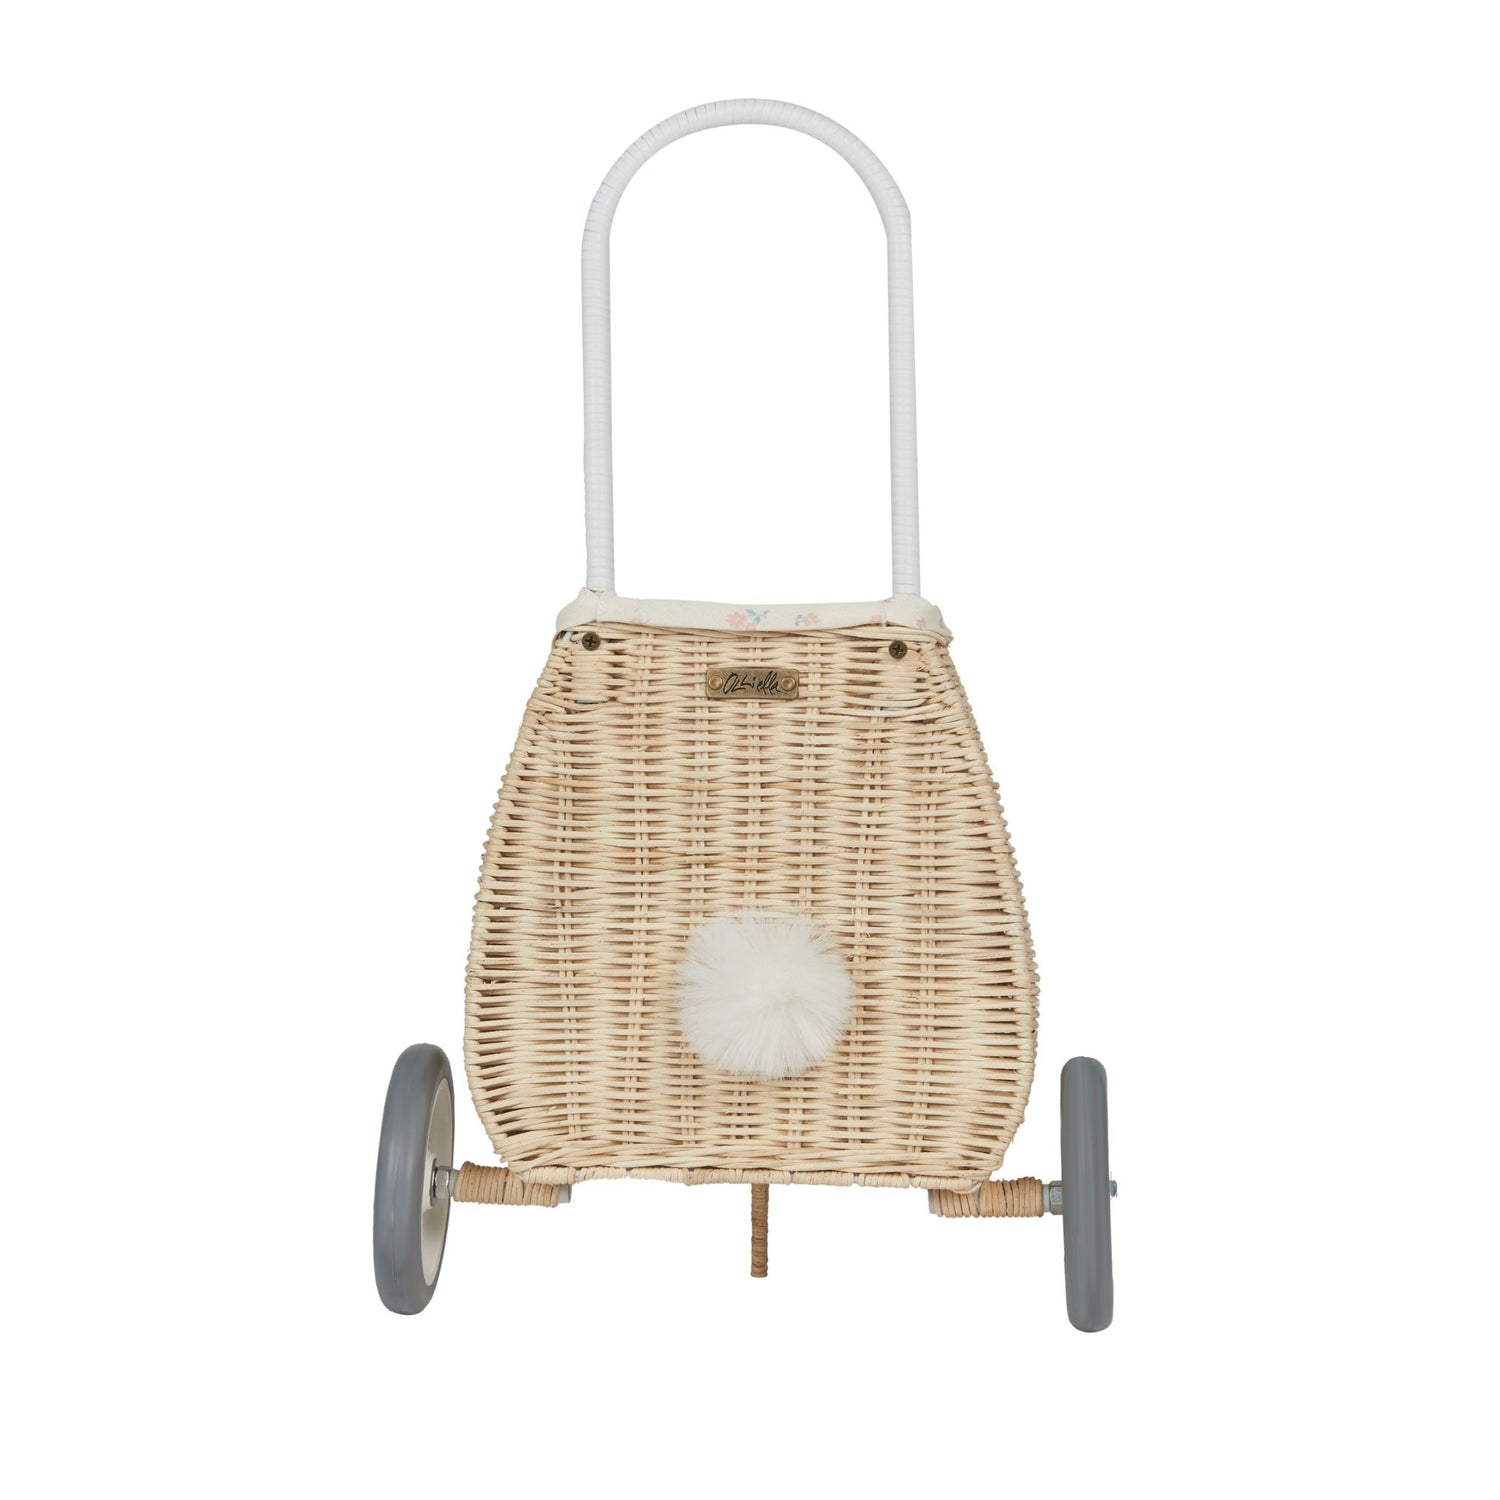 Olli Ella Rattan Bunny Luggy with Lining (Pansy)